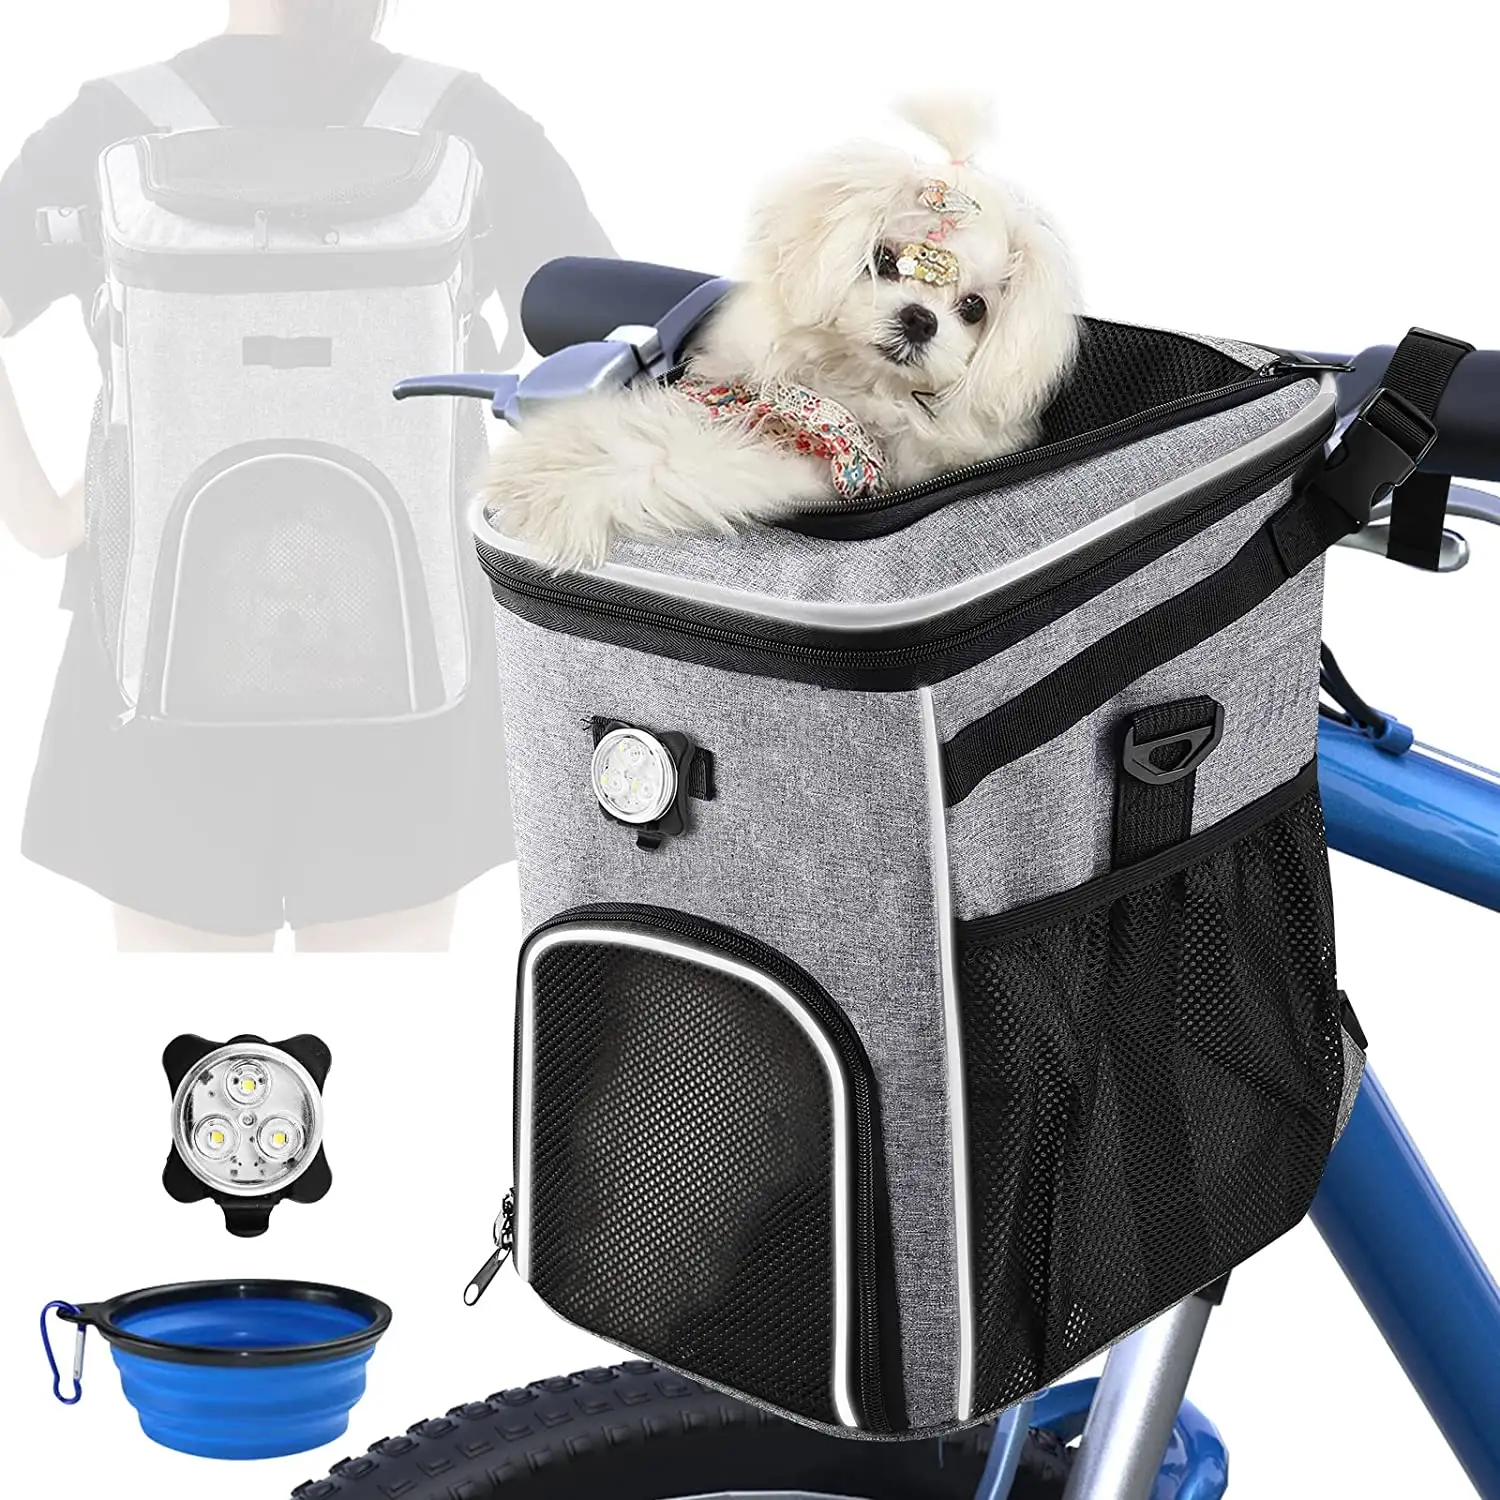 Pet Foldable Travel Bike Seat Pet Bicycle Backpack Bag Puppy Dog Cat Small Animal For Hiking Cycling Basket Accessories